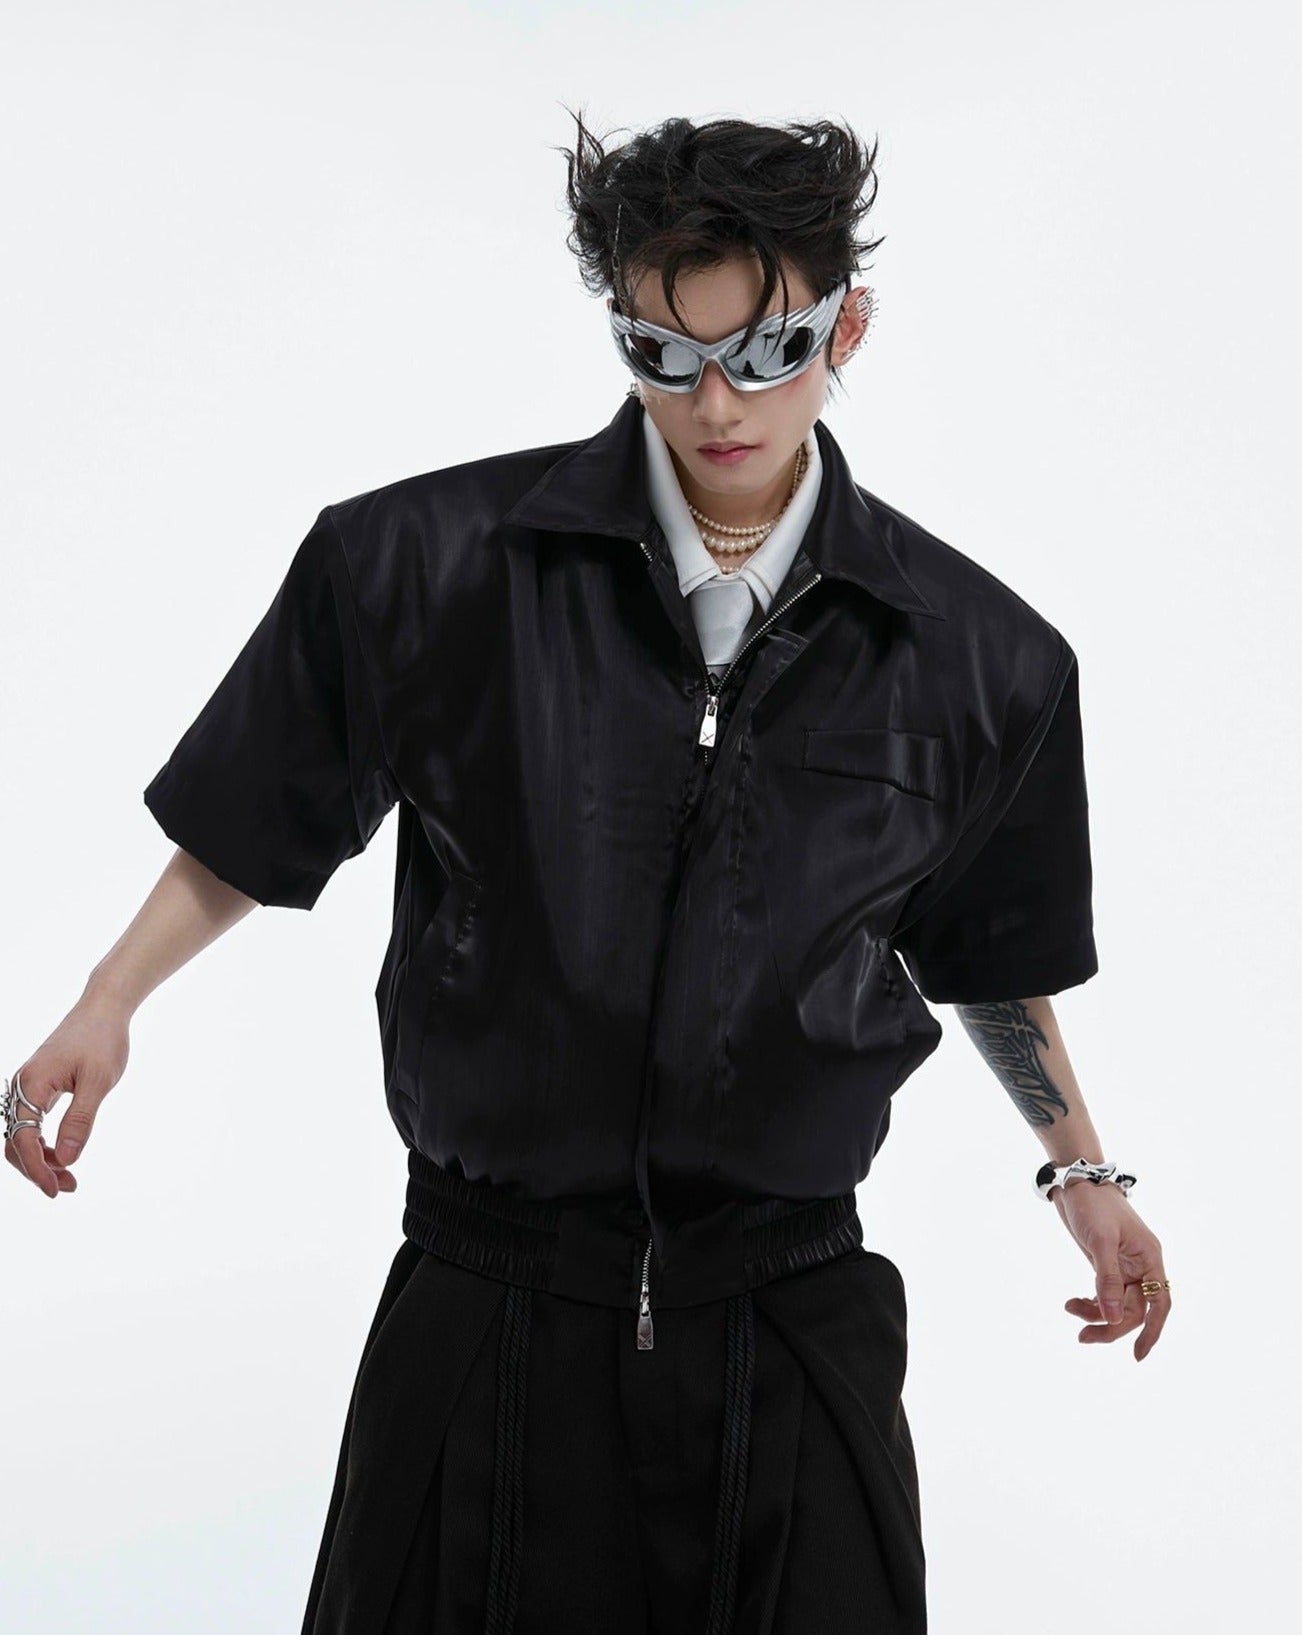 Ruched End Zipped Shirt Korean Street Fashion Shirt By Argue Culture Shop Online at OH Vault